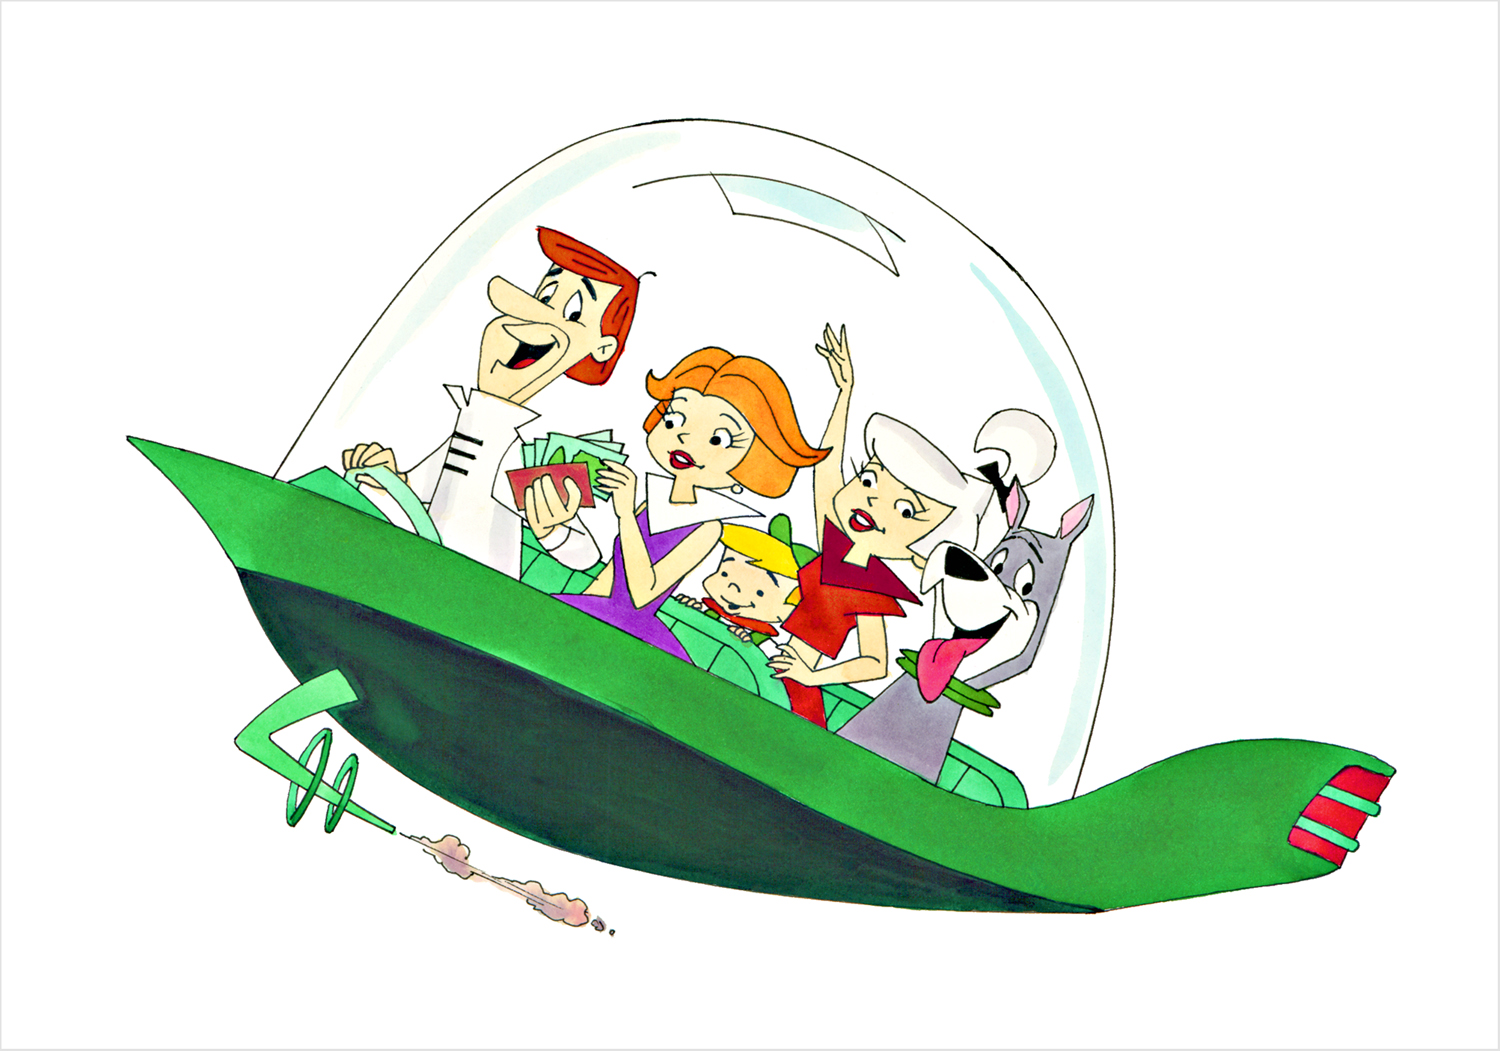 George Jetson's birthday: Twitter users take to the platform to wish 'The Jetsons' father a happy birthday - masslive.com